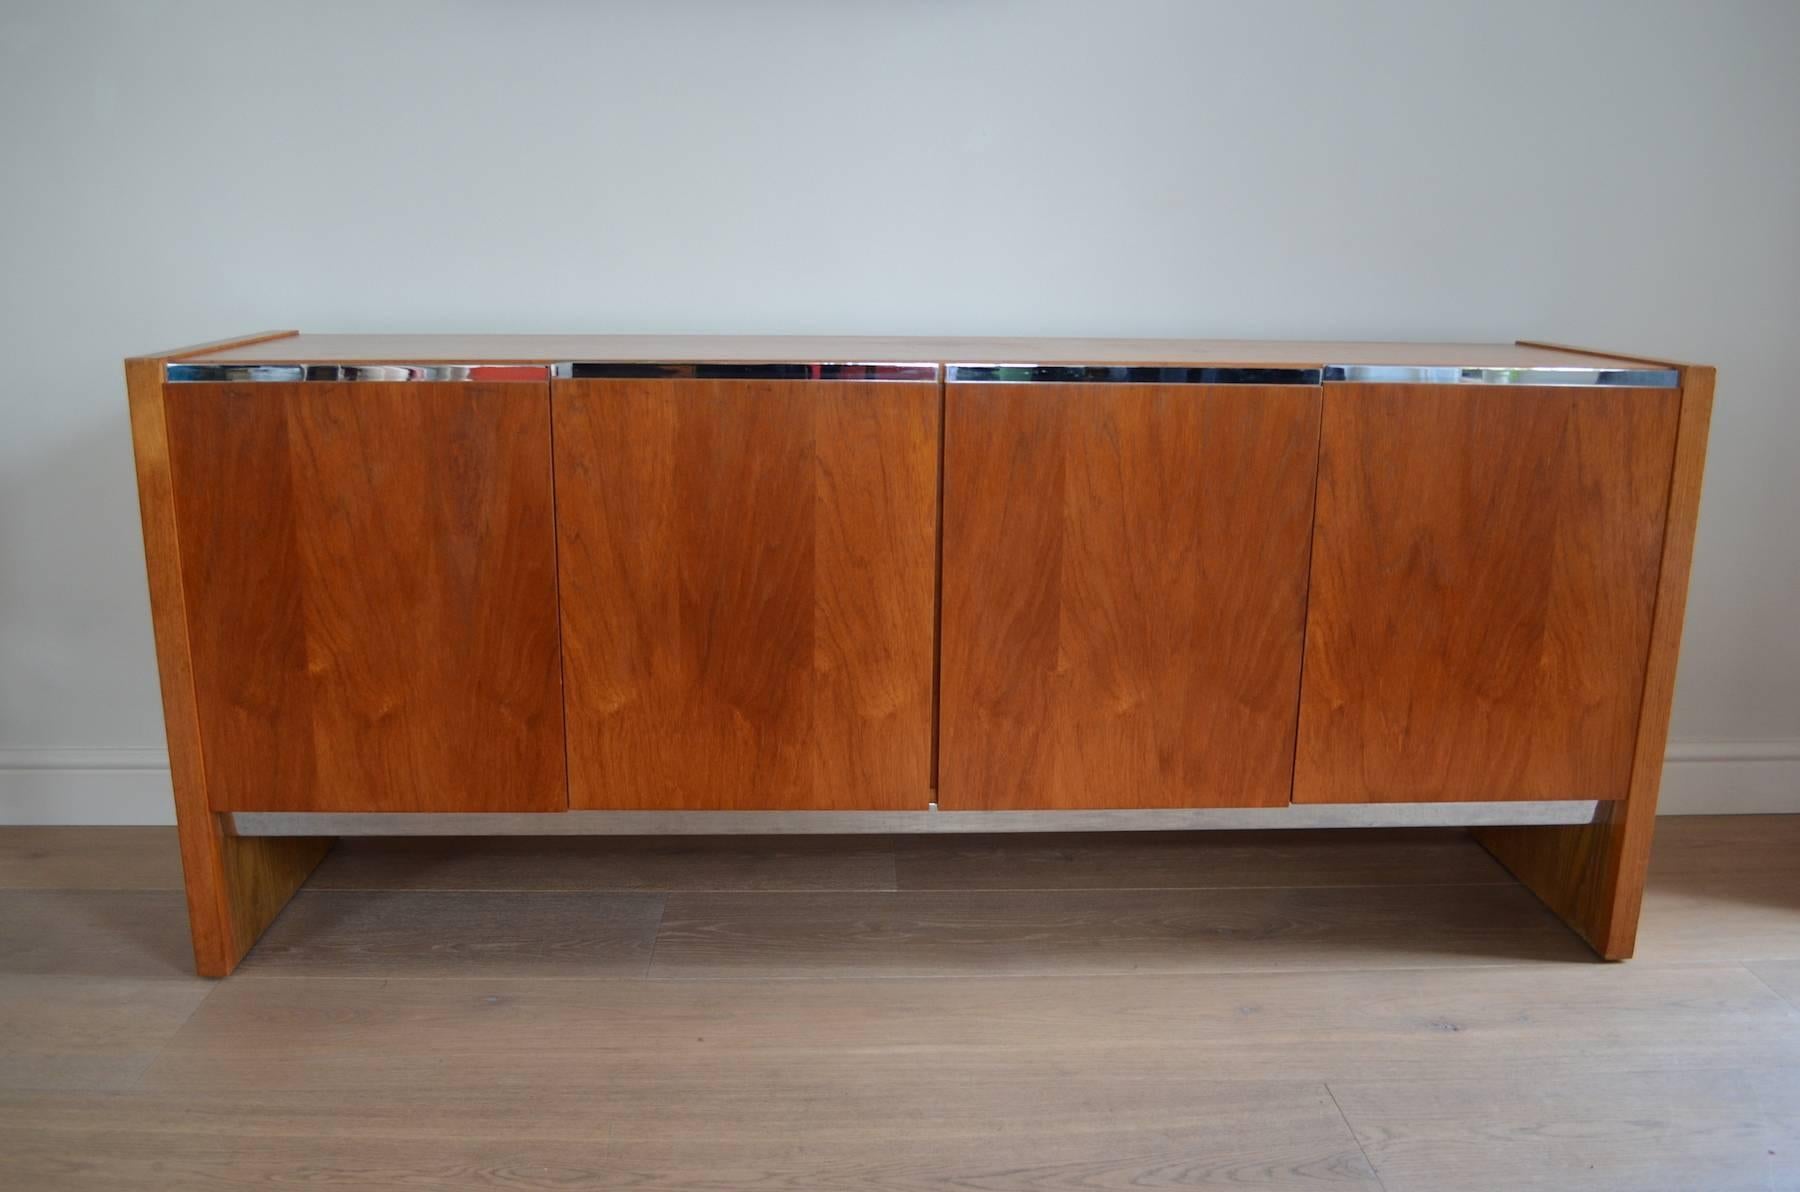 A rare and high quality 1970s Merrow Associates sideboard with chrome-plated steel trim designed by Richard Young for Merrow Associates, England.
  